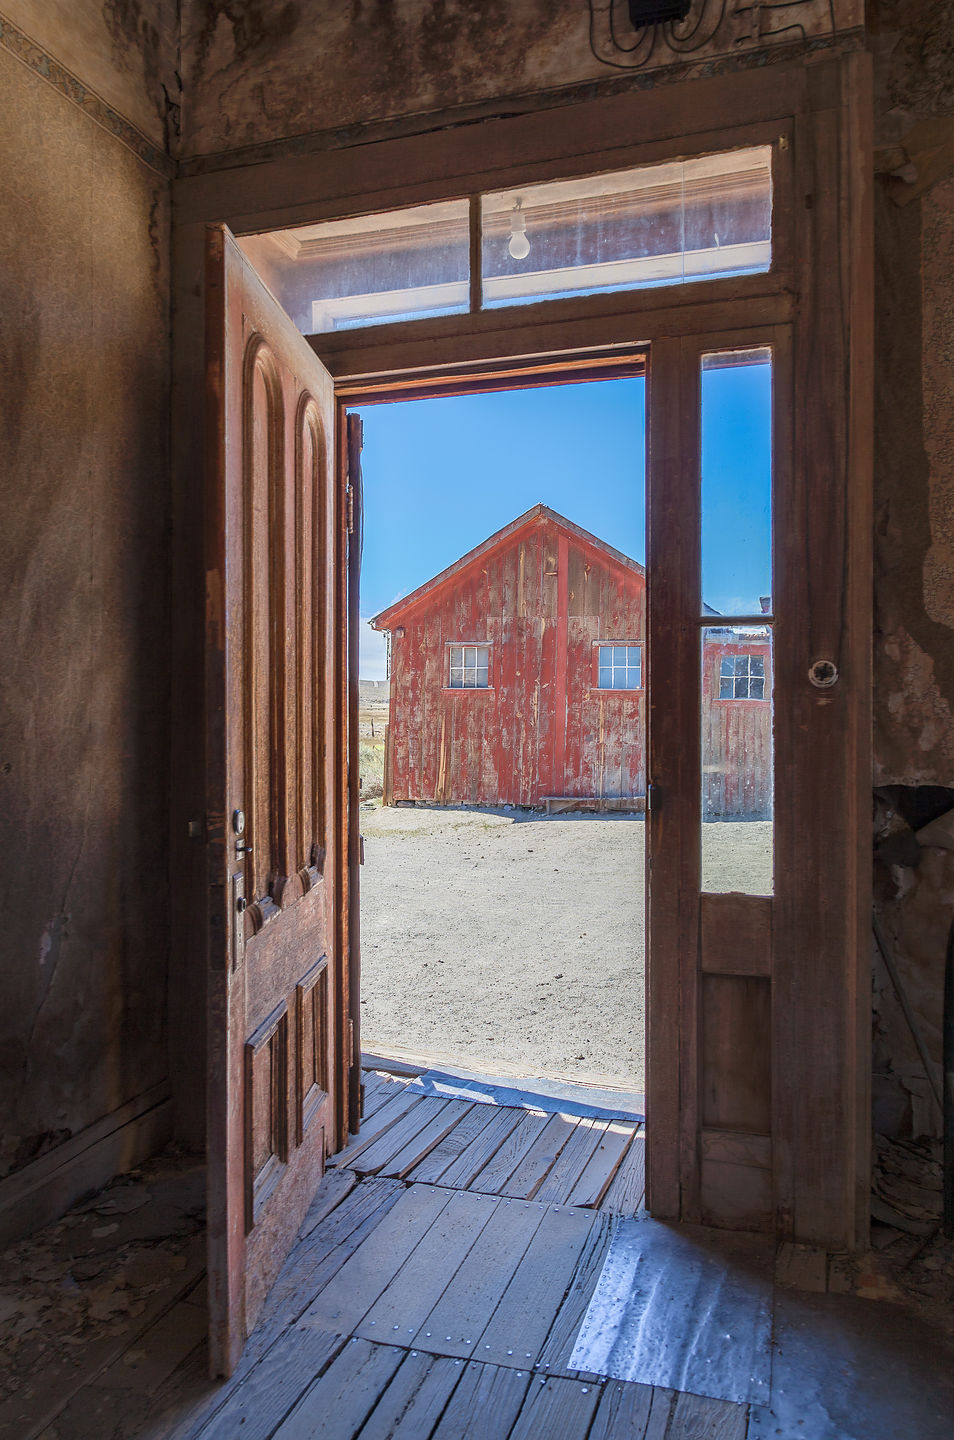 View from Doorway at Bodie